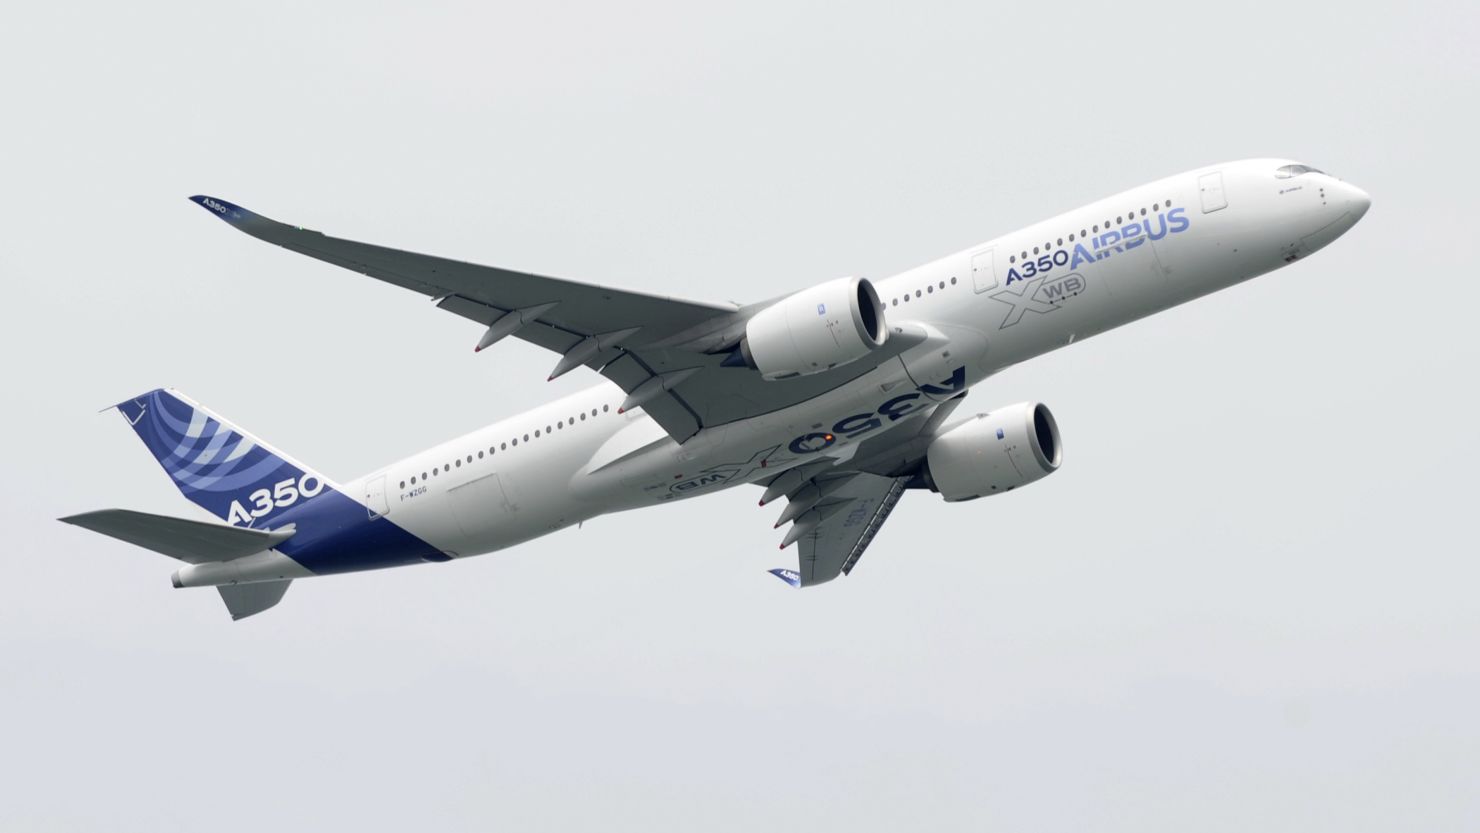 The A350 XWB performed its first ever airshow flyover at this year's Singapore Airshow.